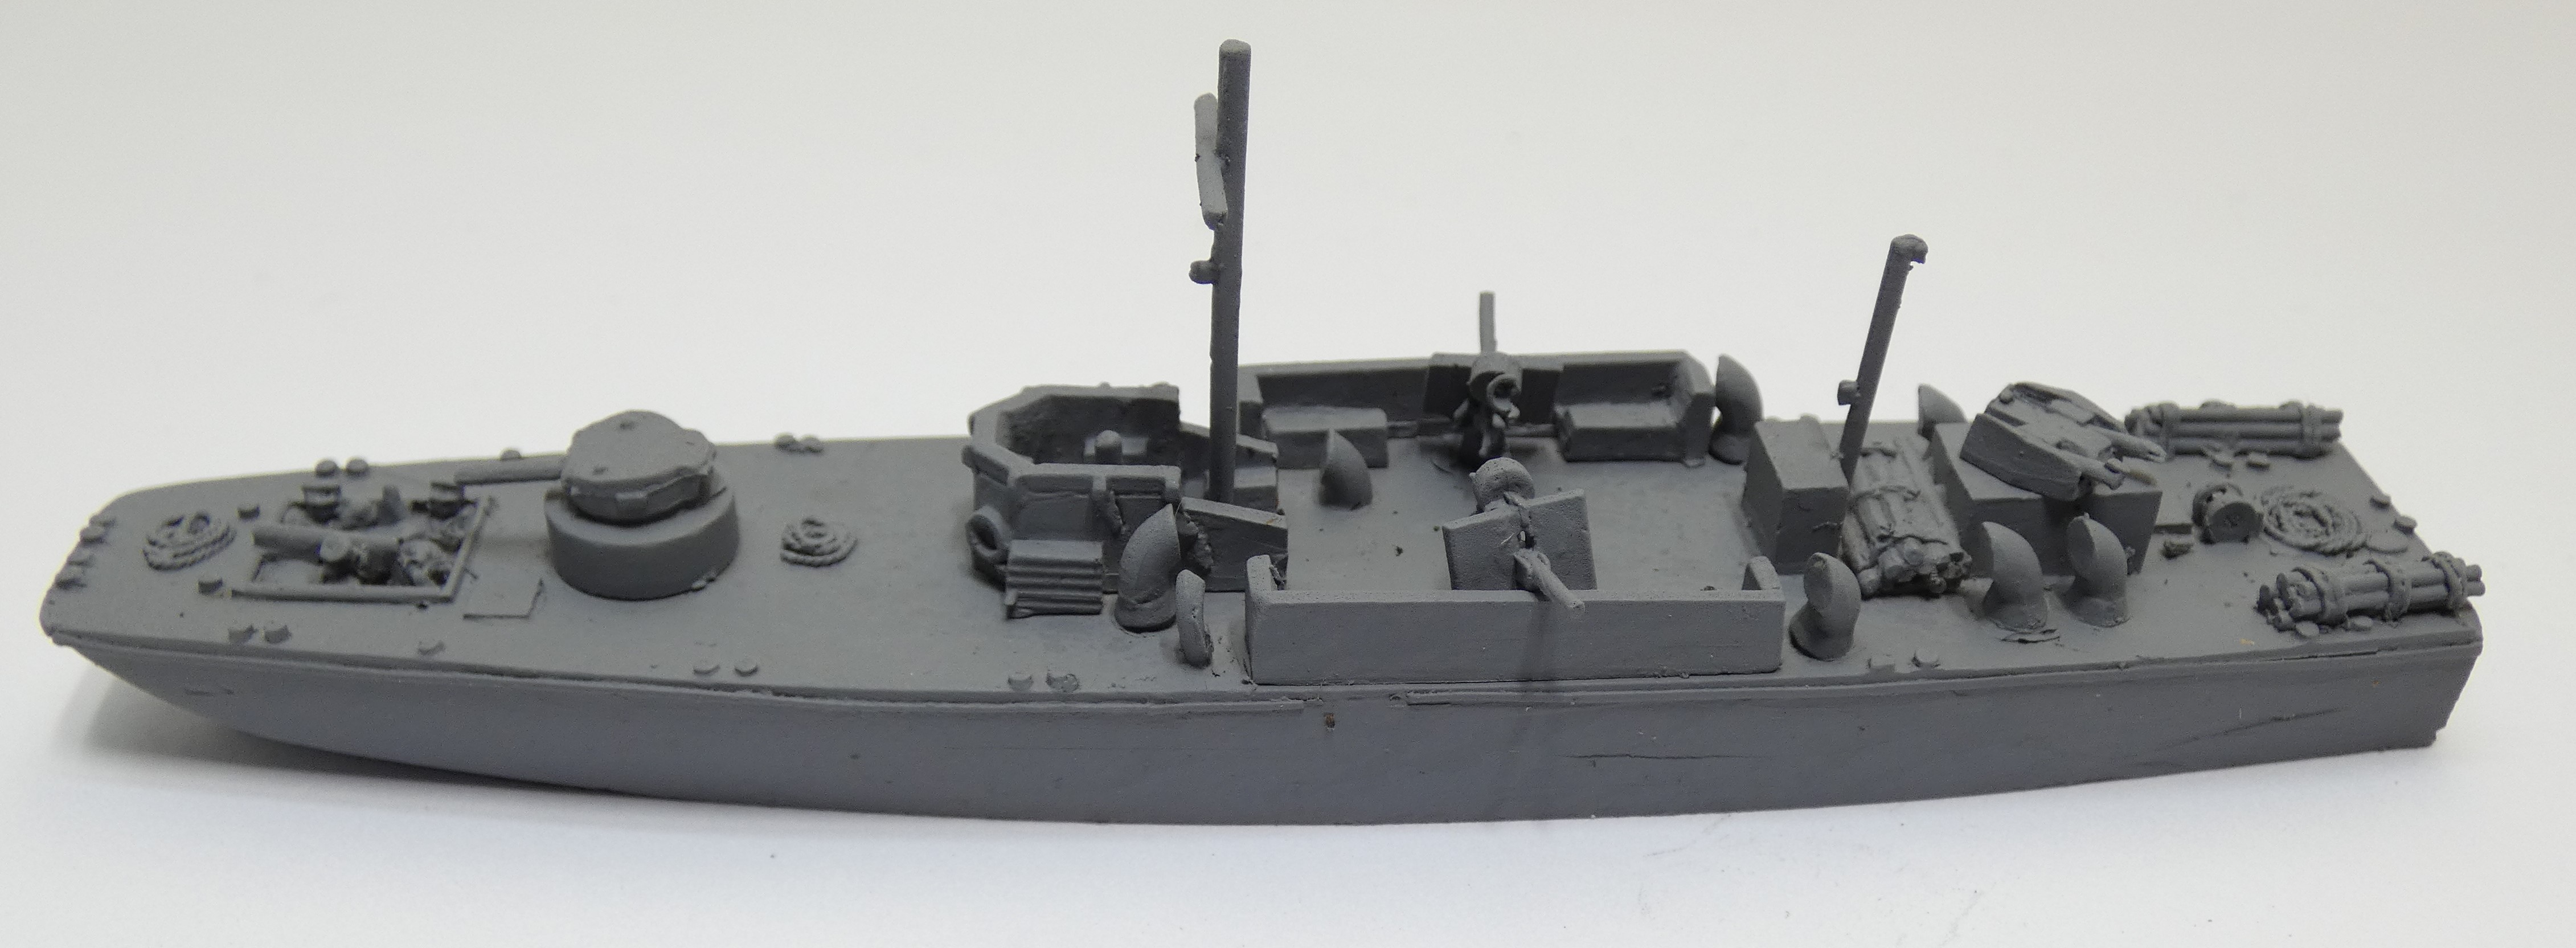 STS96 – LCI(S) landing craft infantry small support mk2